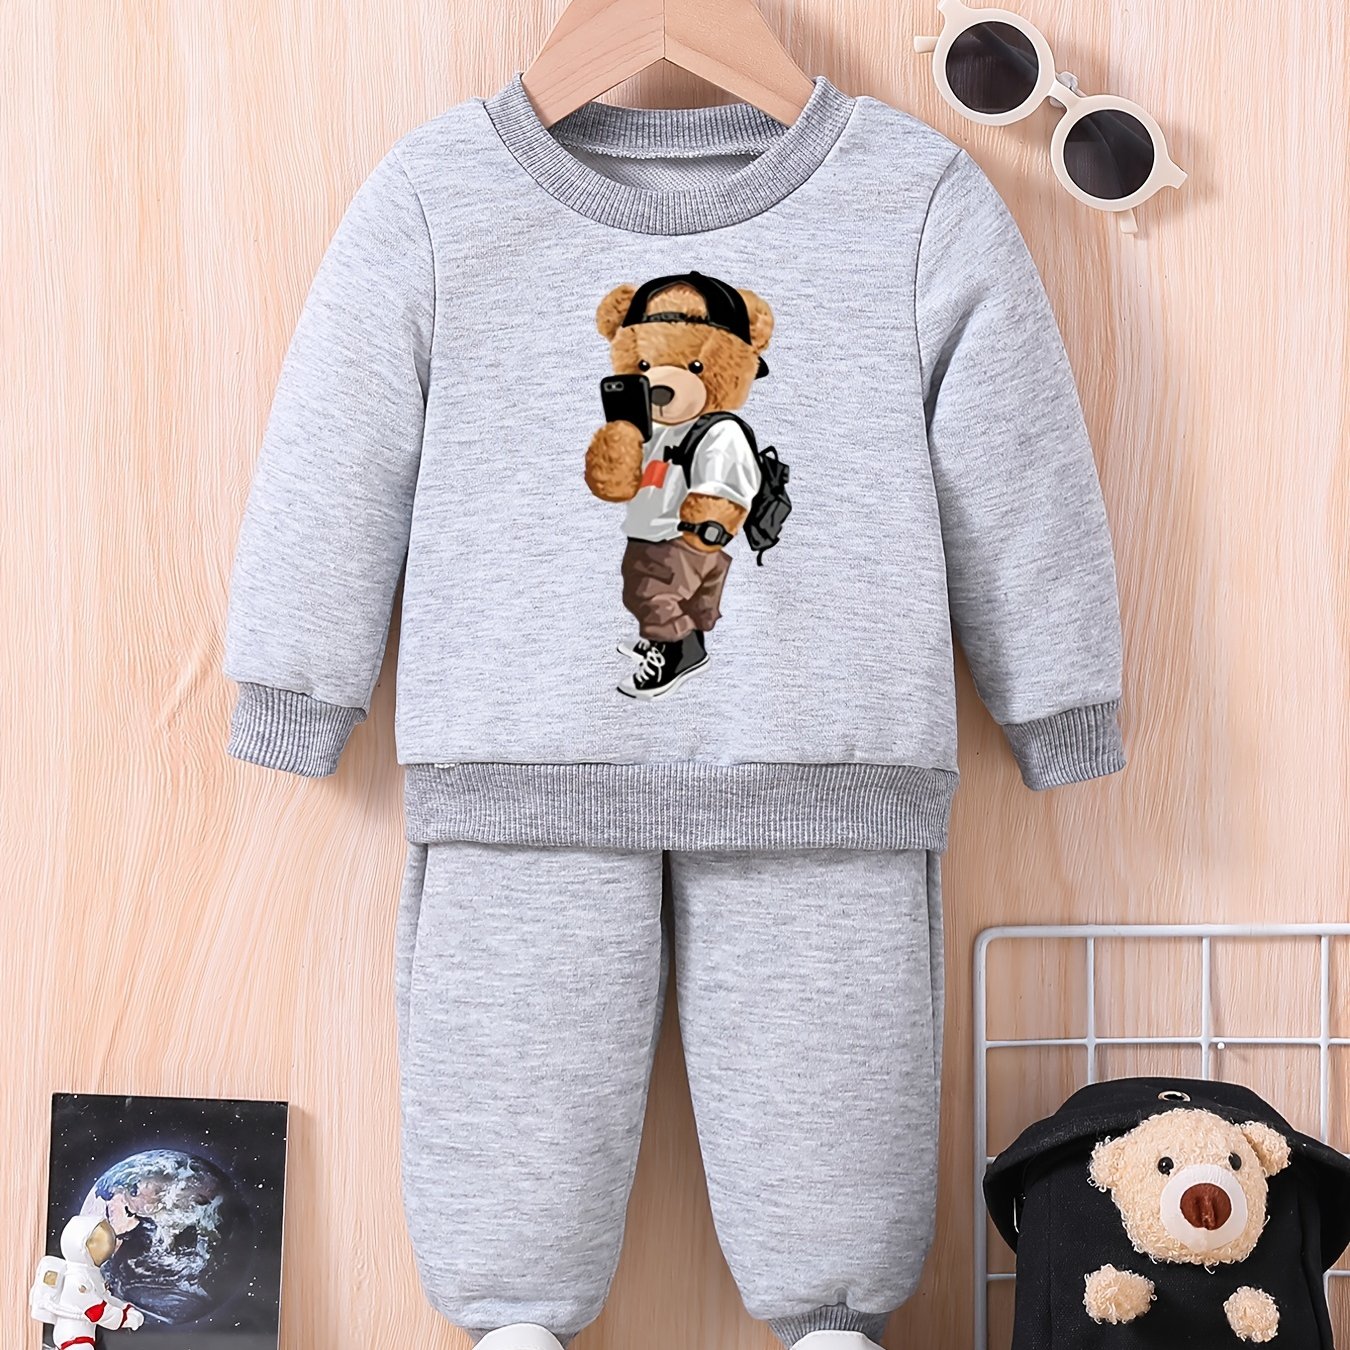 Super Cute Parent Child Matching Outfit: Soft And Warm Autumn/Winter Bear  Couple Sweaters YQ230928 From Sts_013, $35.09